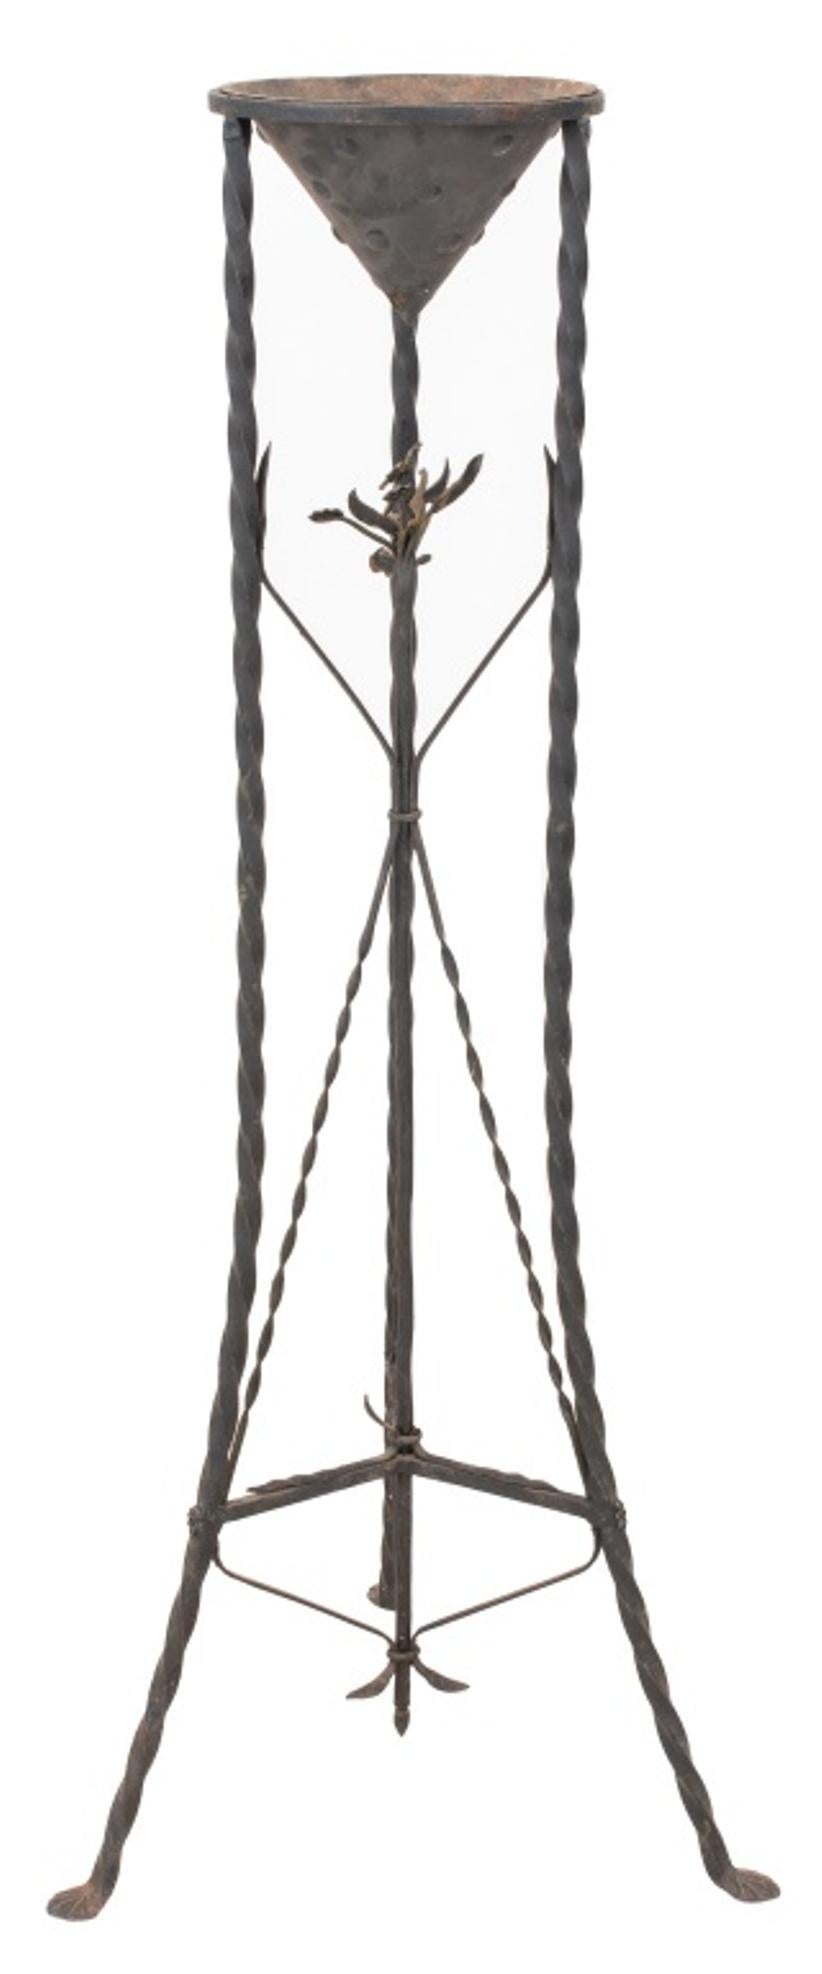 Spanish style wrought iron pant stand, of tripodal form, with conical stand supported by three twisted wrought iron supports conjoined by cross-spindles supporting a center shaft decorated with flowers. 54